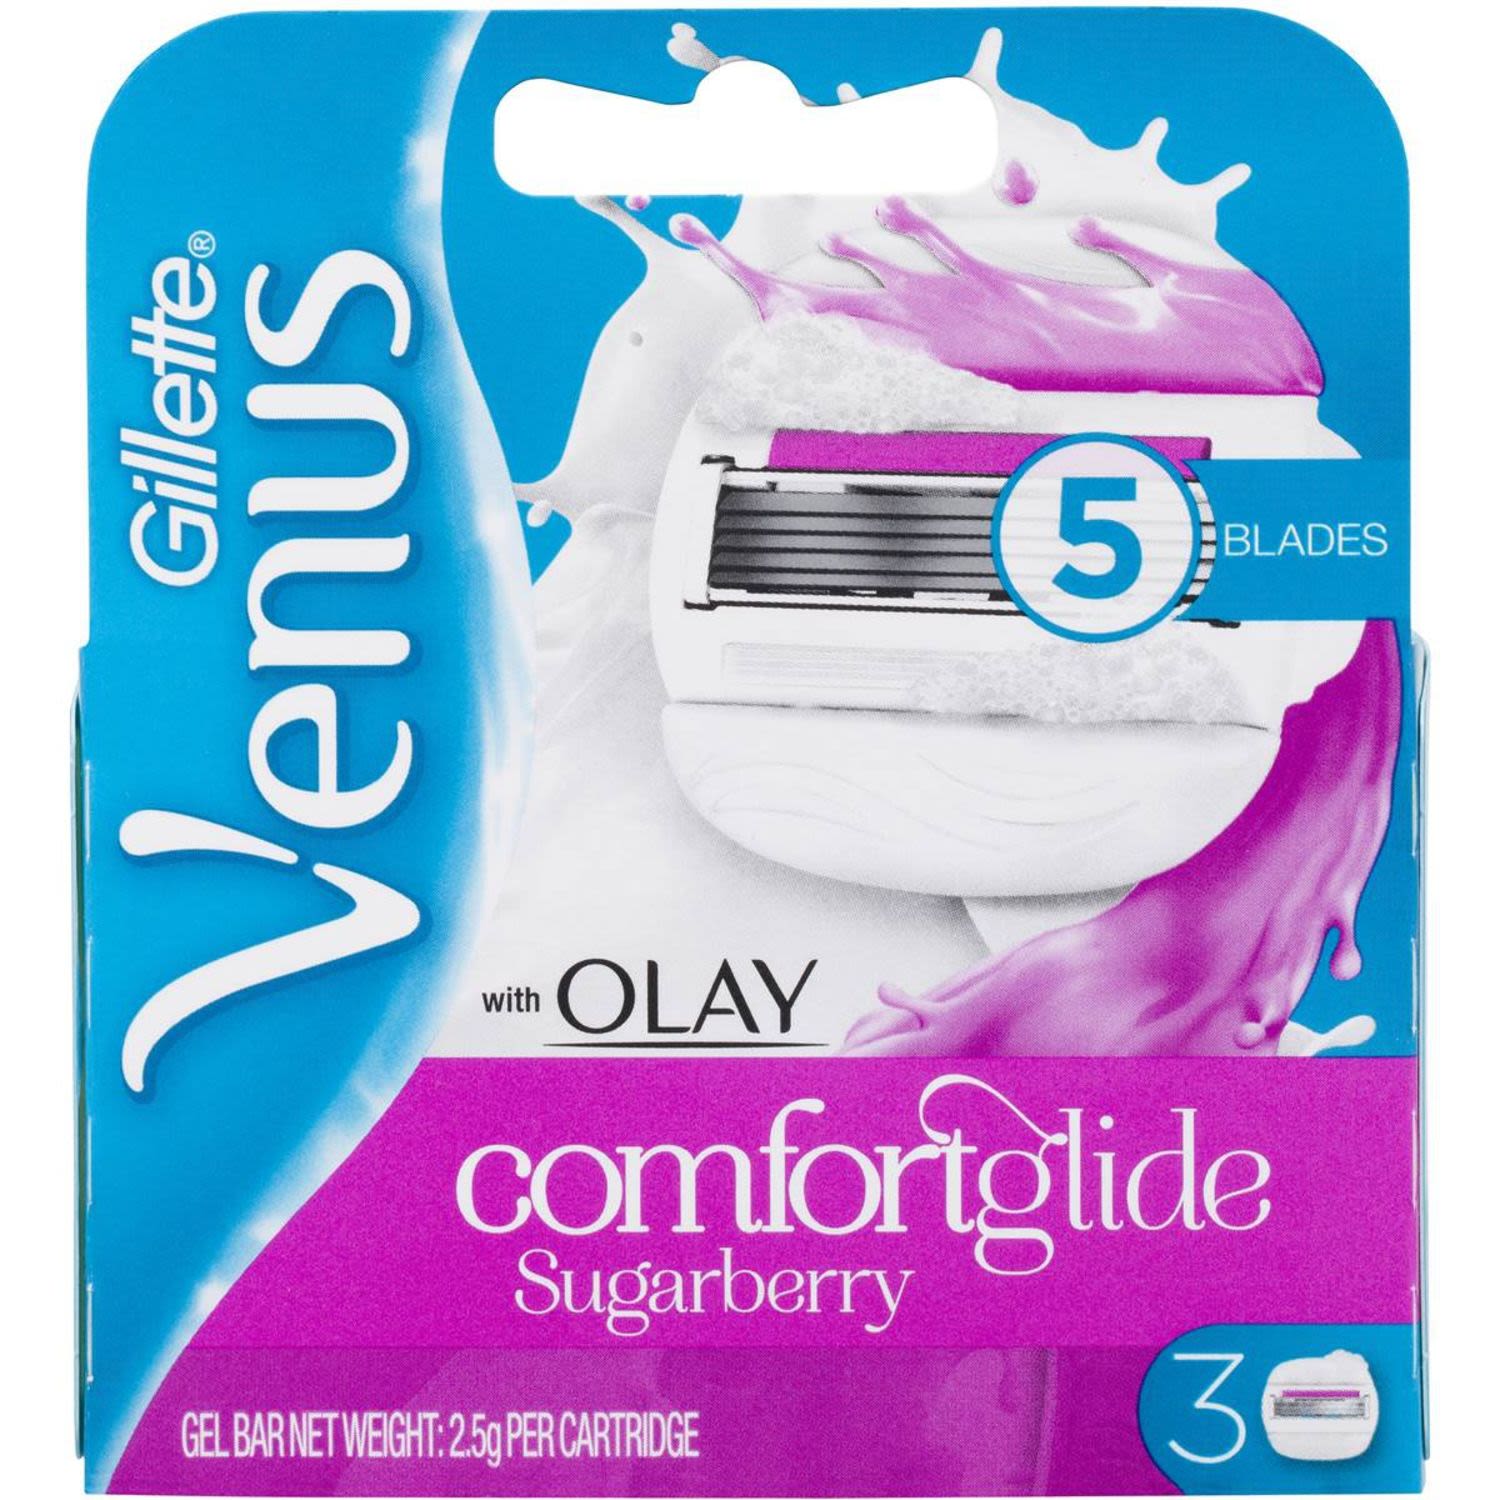 Gillette Venus Comfortglide With Olay Sugarberry Blades, 3 Each